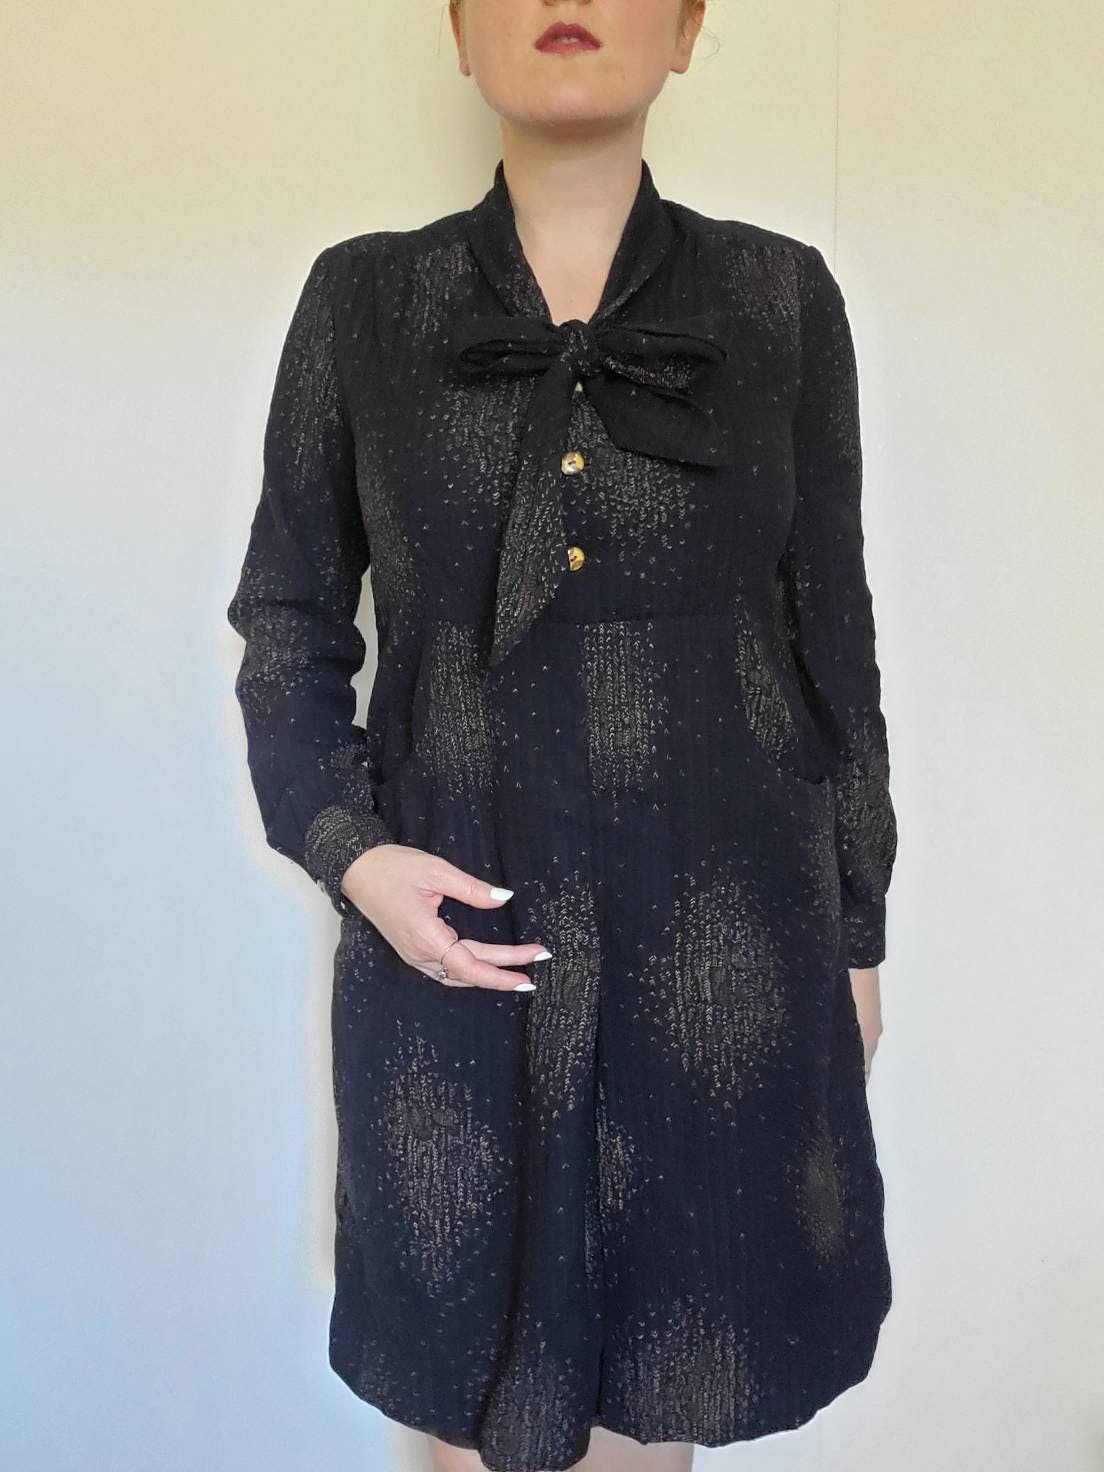 Vintage 60’s/70’s Black Wool Empire Waist Pussybow Dress | Shop THRILLING